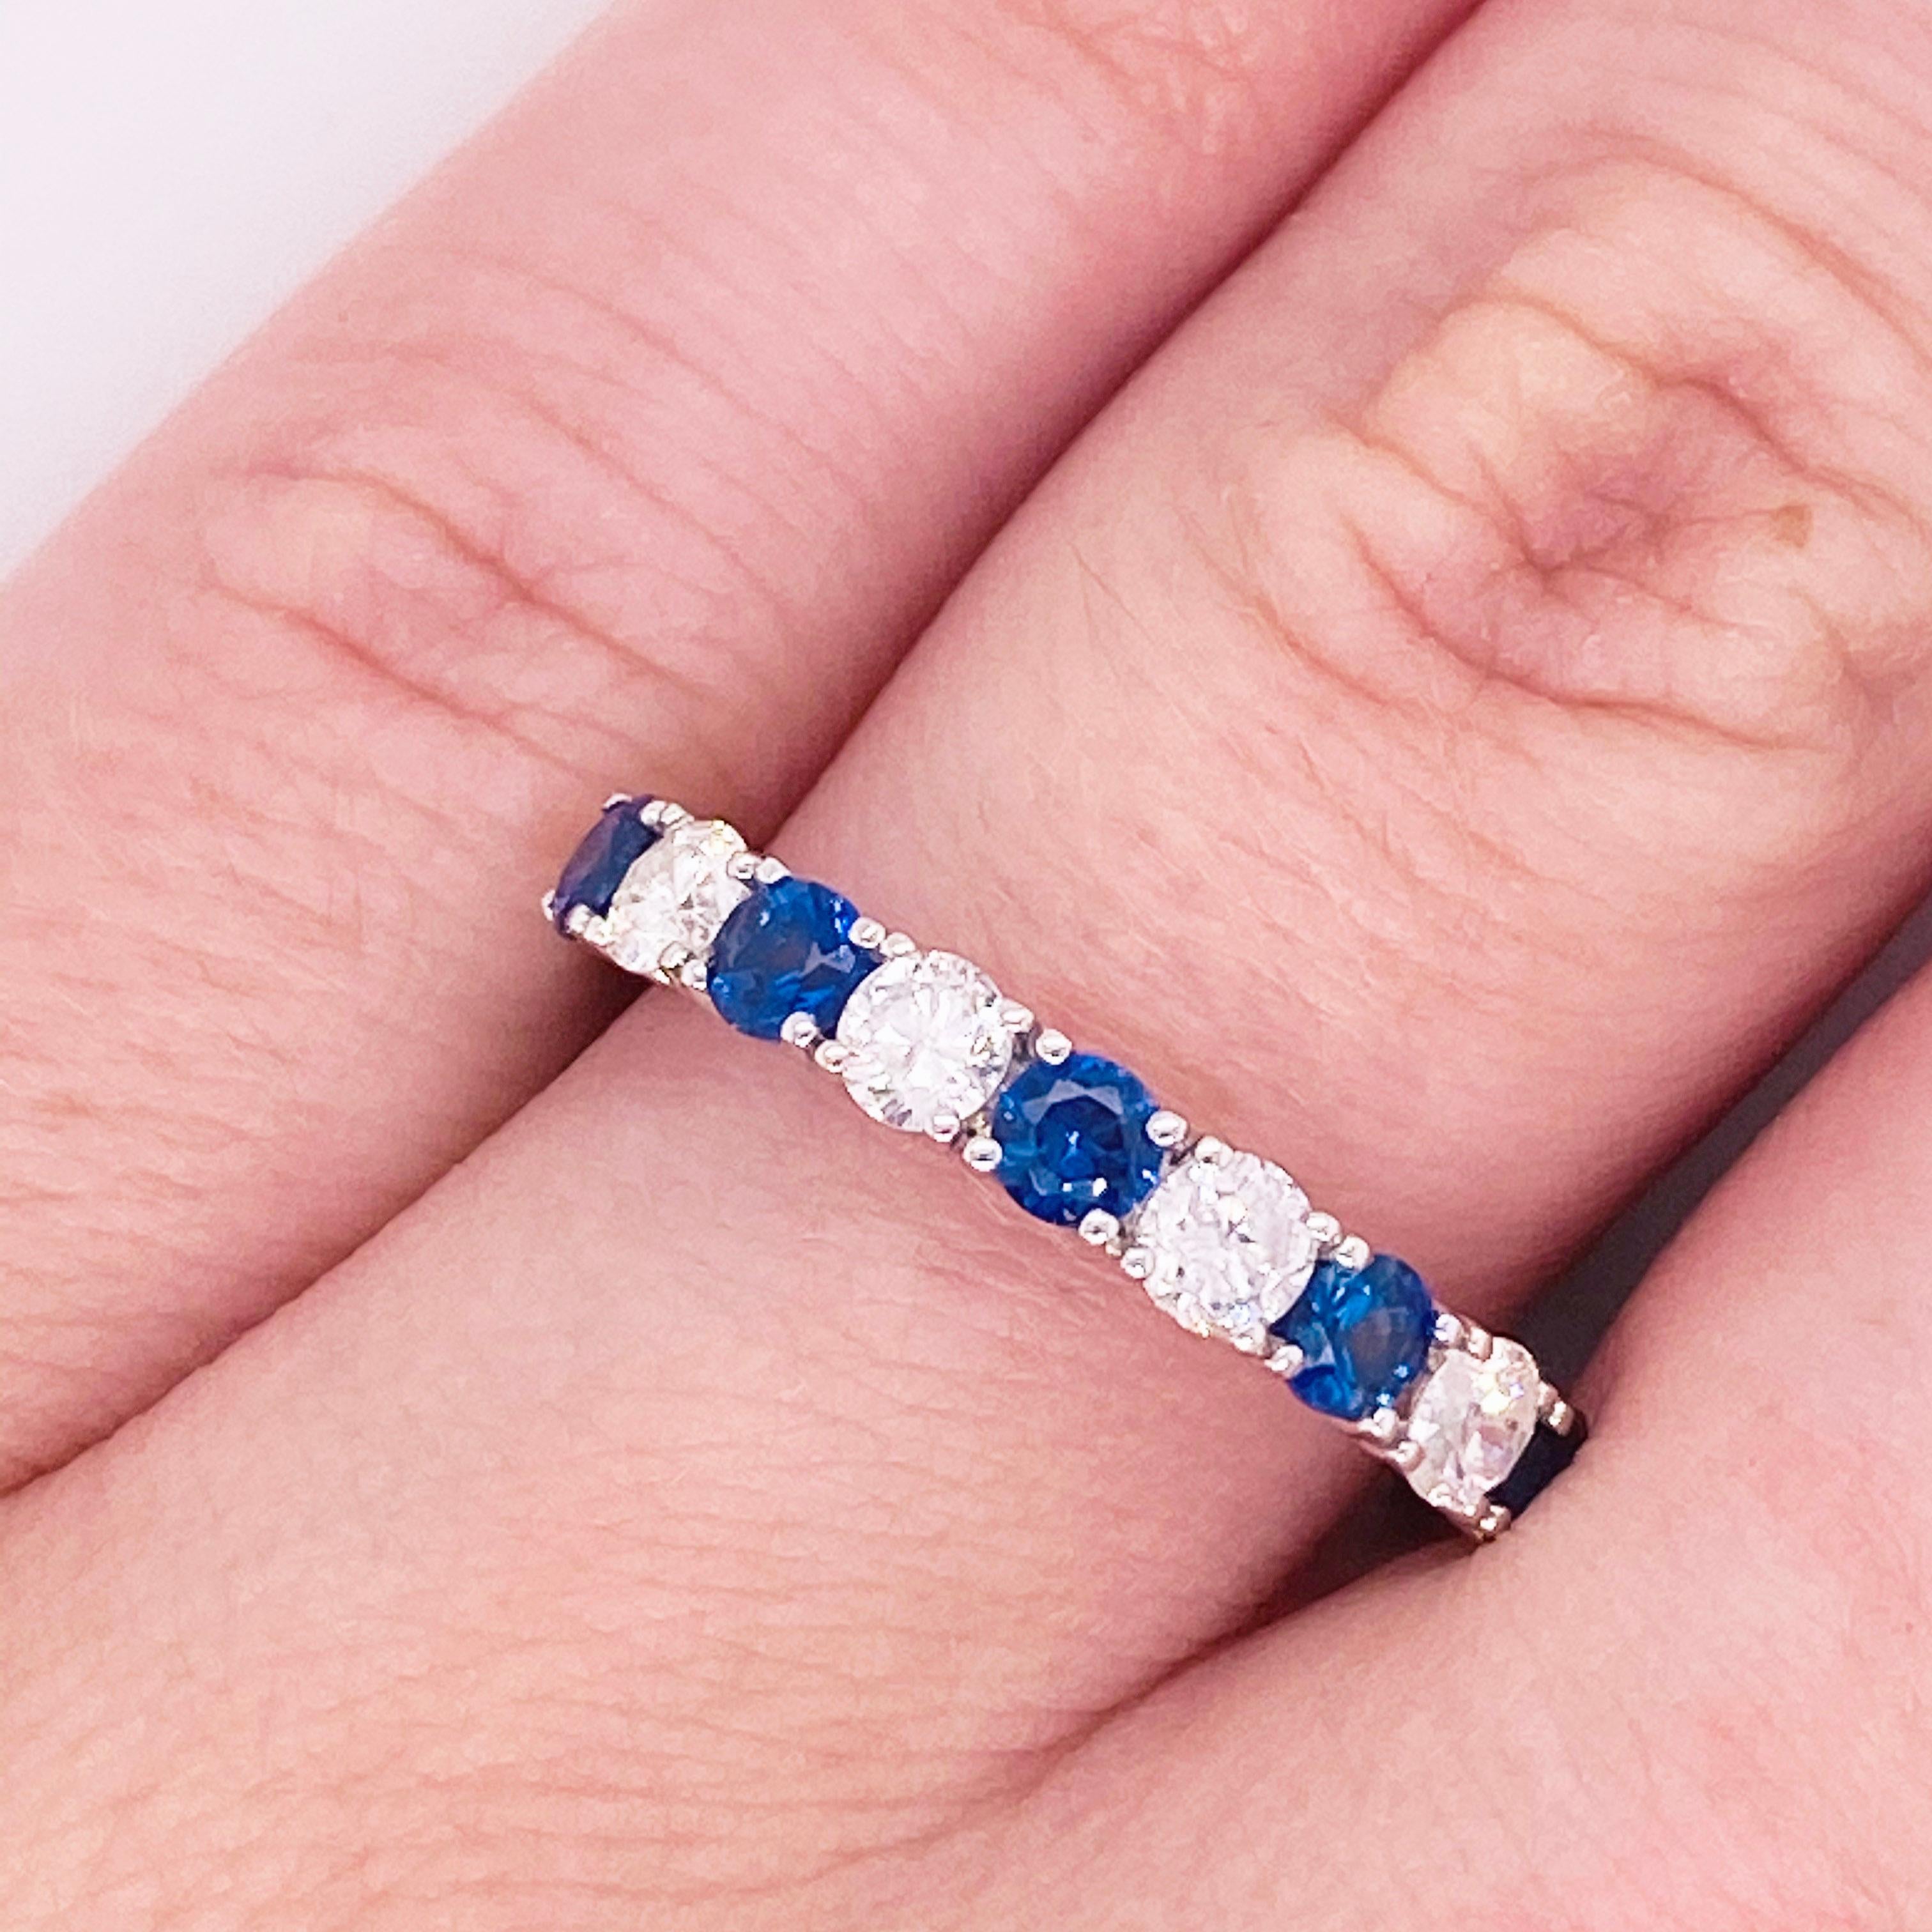 These stunning rich blue sapphires and white diamonds set in polished 18k white gold provide a look that is very classic and modern at the same time! This ring is very fashionable and can add a touch of style to any outfit, yet it is also classy